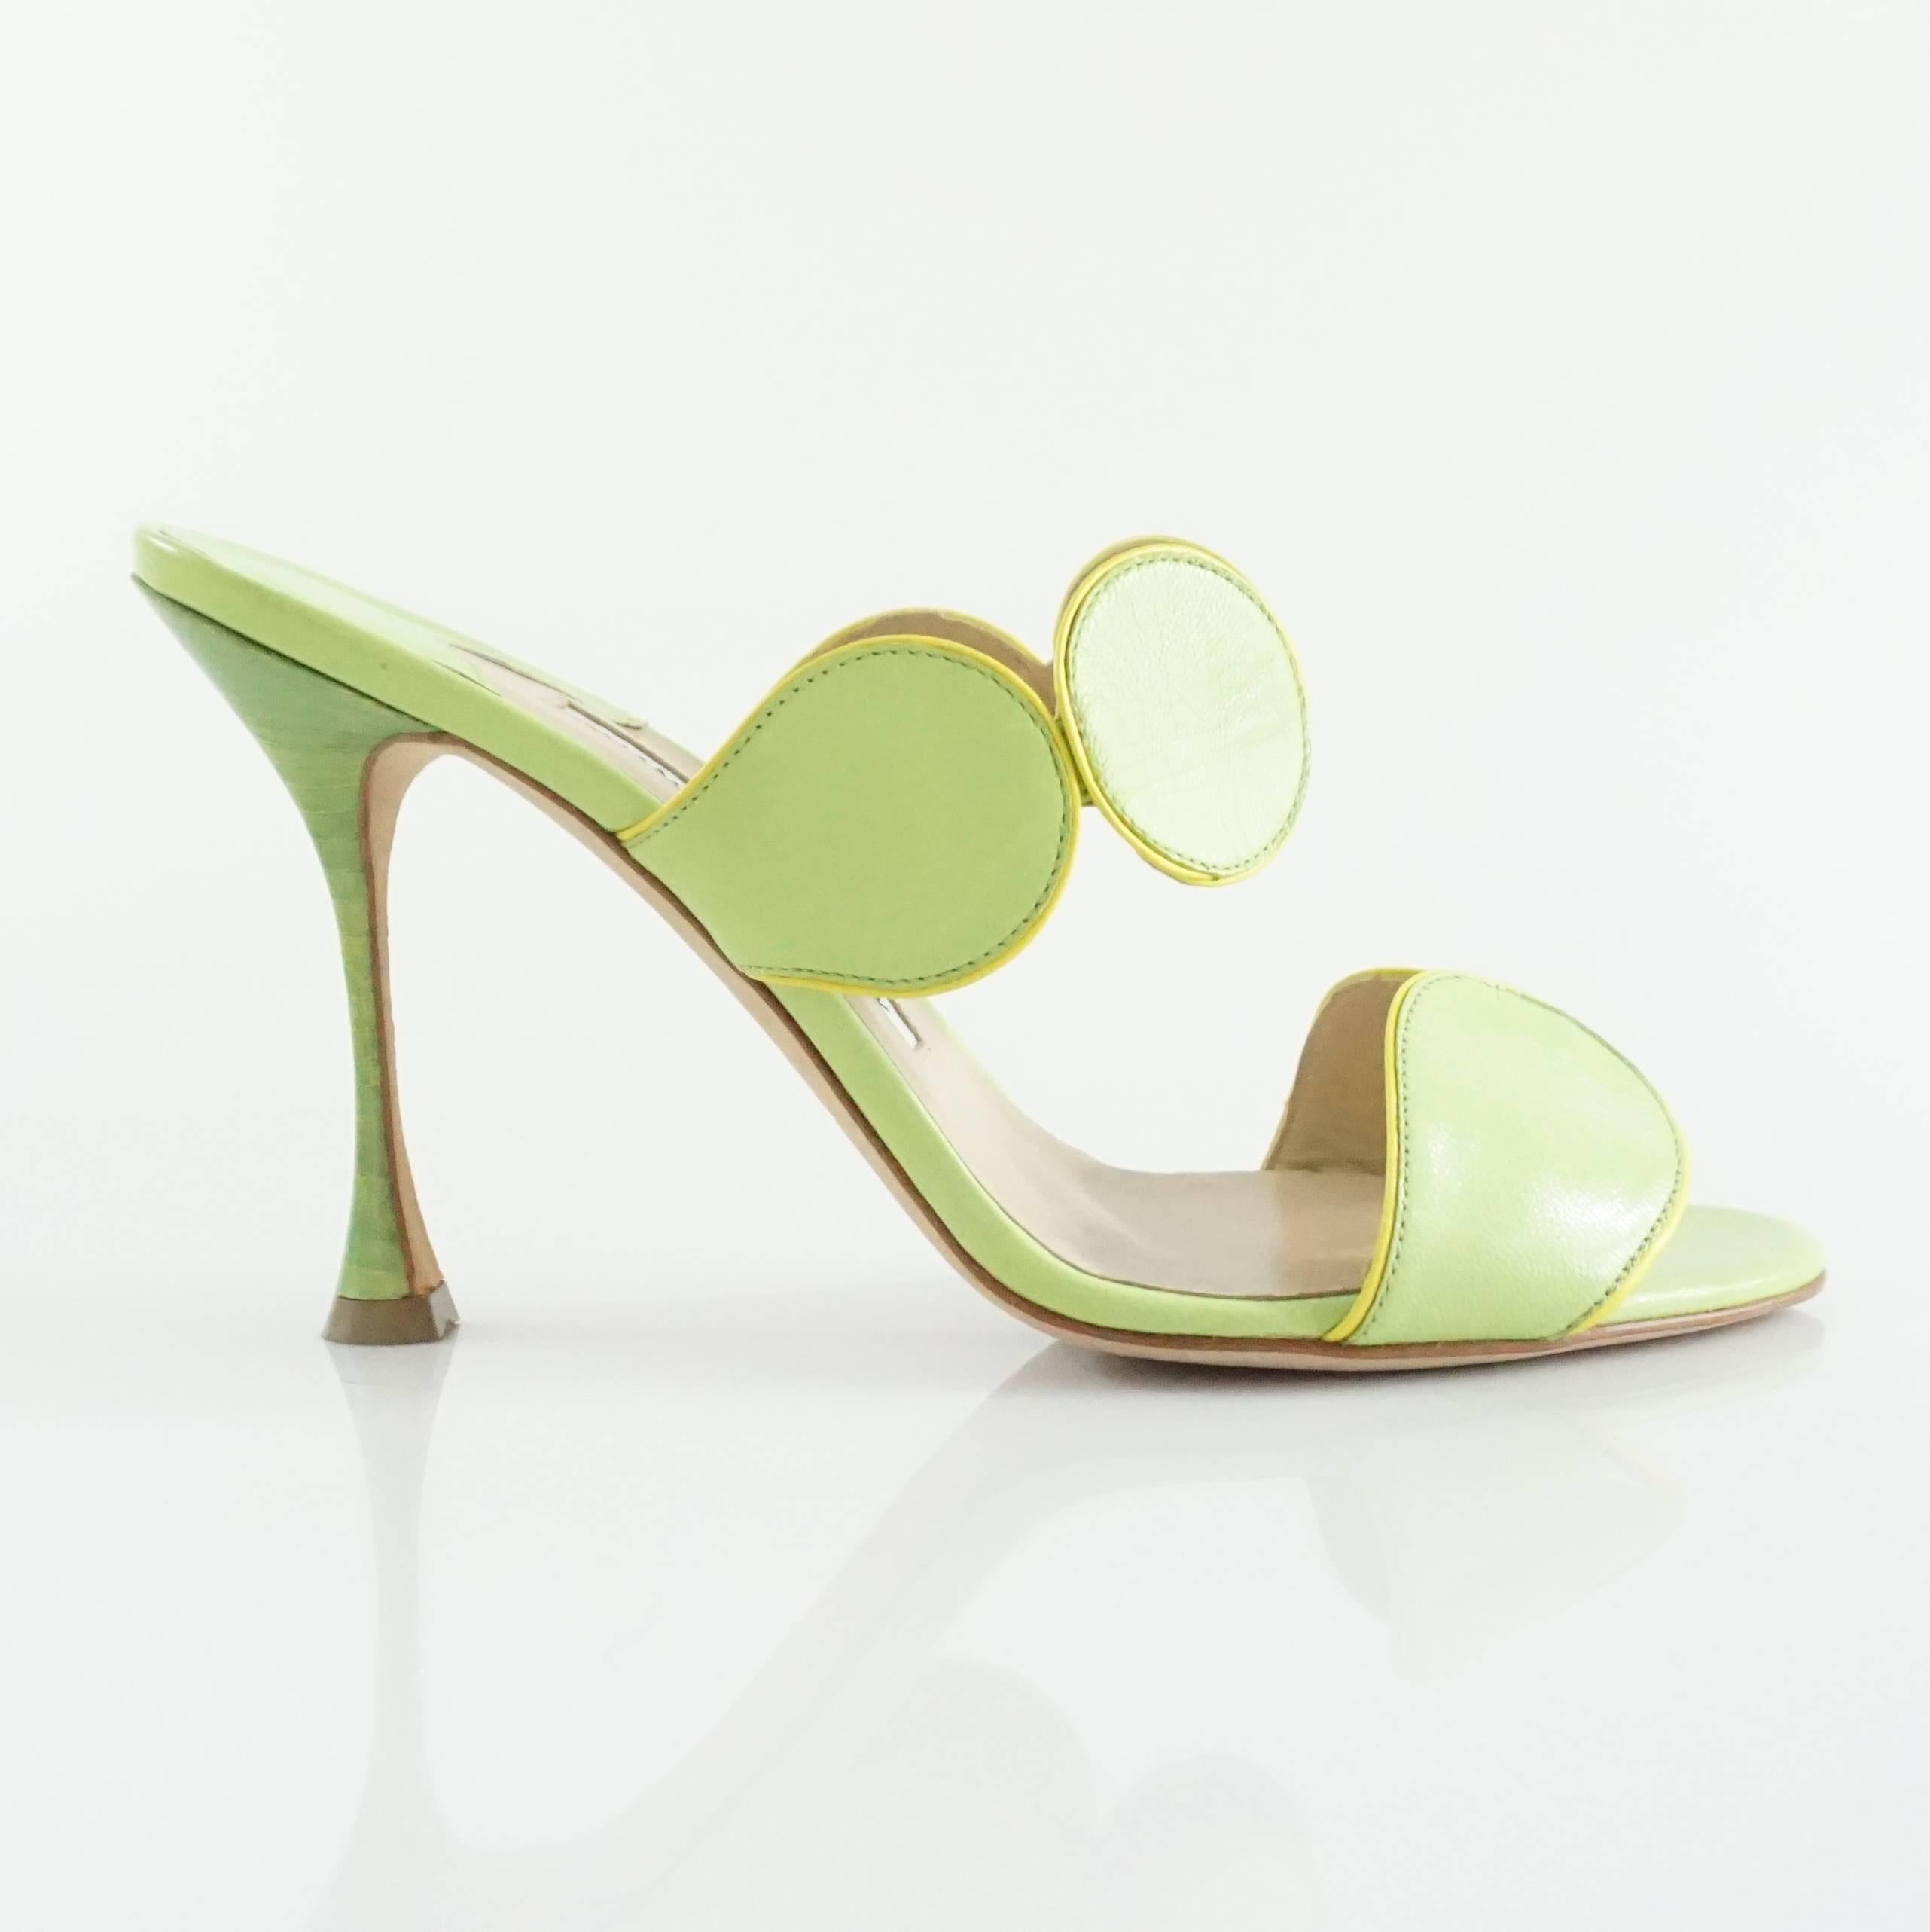 These Manolo Blahnik sandals are green leather with a yellow trim on both straps. The straps are made of circular pieces of leather. These heeled sandals are in very good condition with minor wear.

Heel Measurement: about 4"